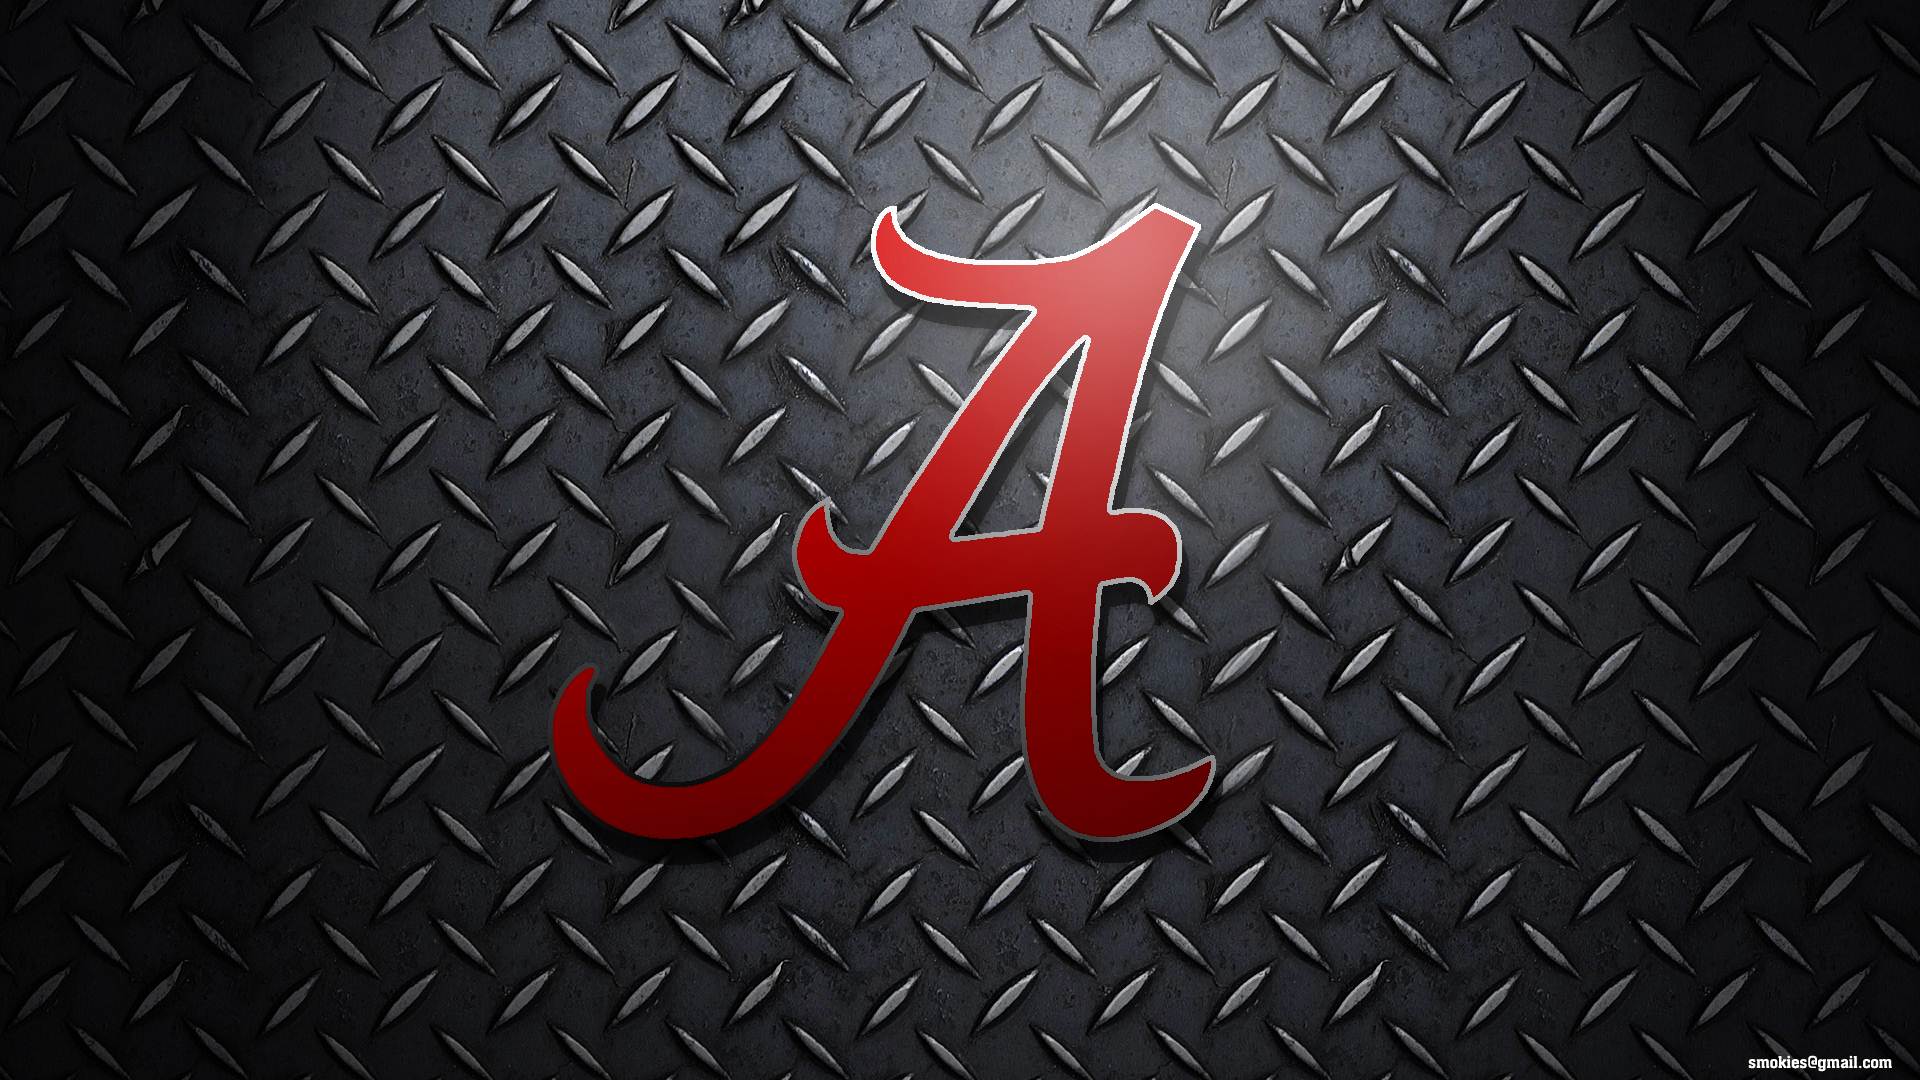 PFF College on Twitter THE UNIVERSITY OF ALABAMA WILL BE COMPETING FOR  THE 2022 NATIONAL CHAMPIONSHIP  RollTide httpstco1ialYnlA15   Twitter